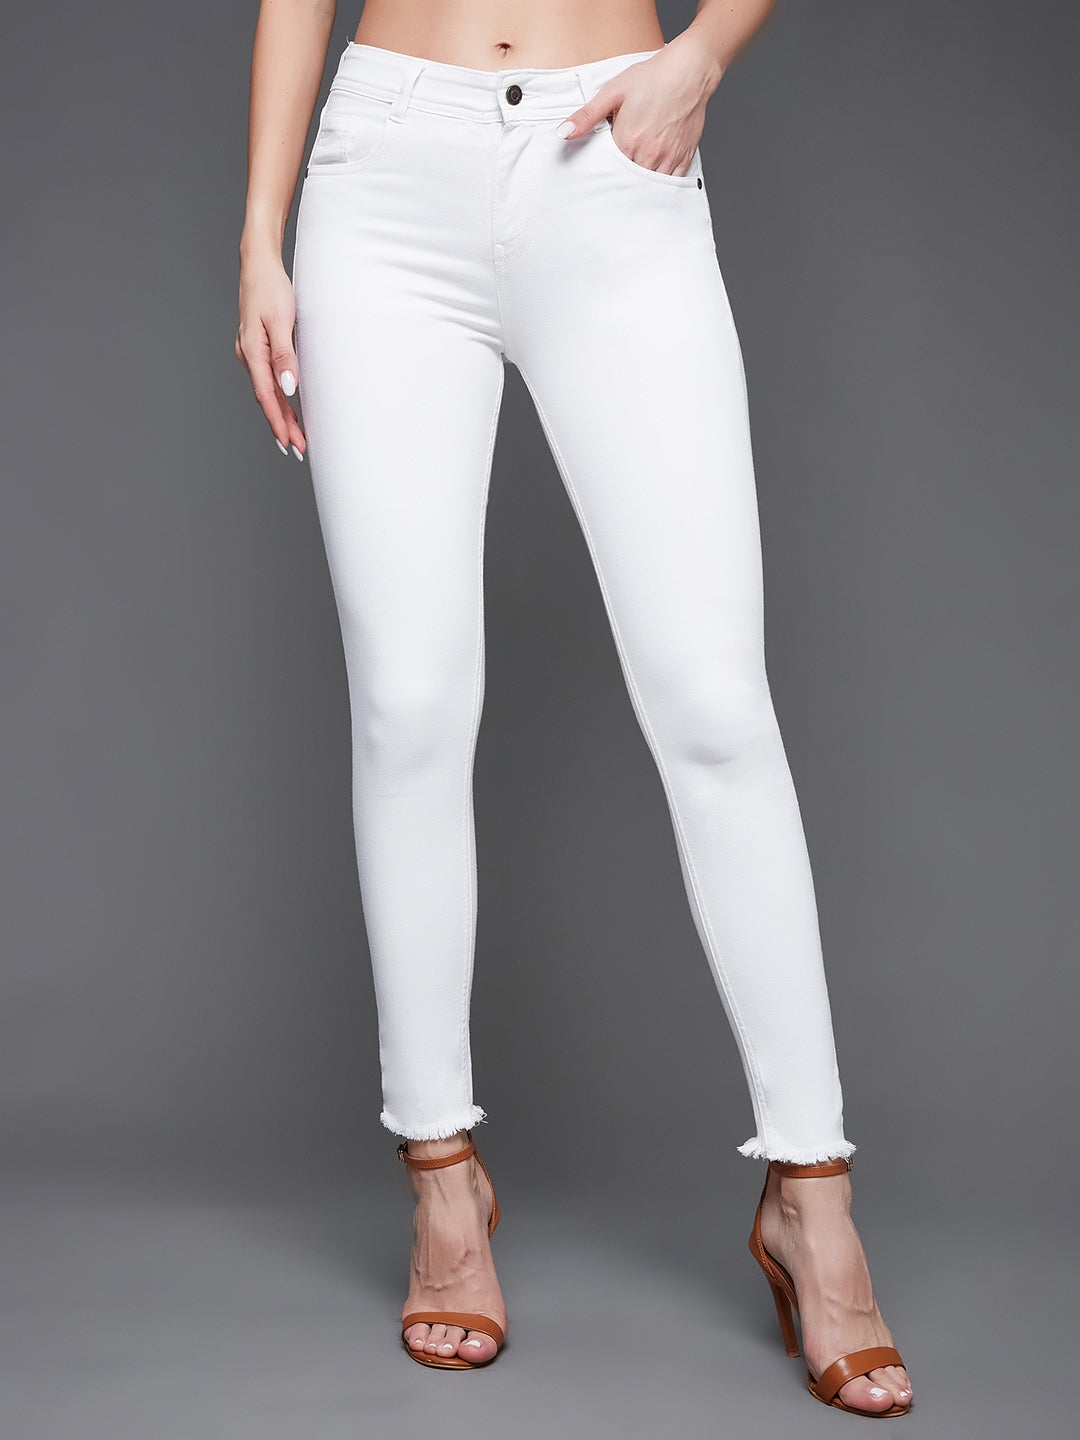 MISS CHASE | White Skinny Mid Rise Bleached Clean Look Cropped Stretchable Denim Jeans